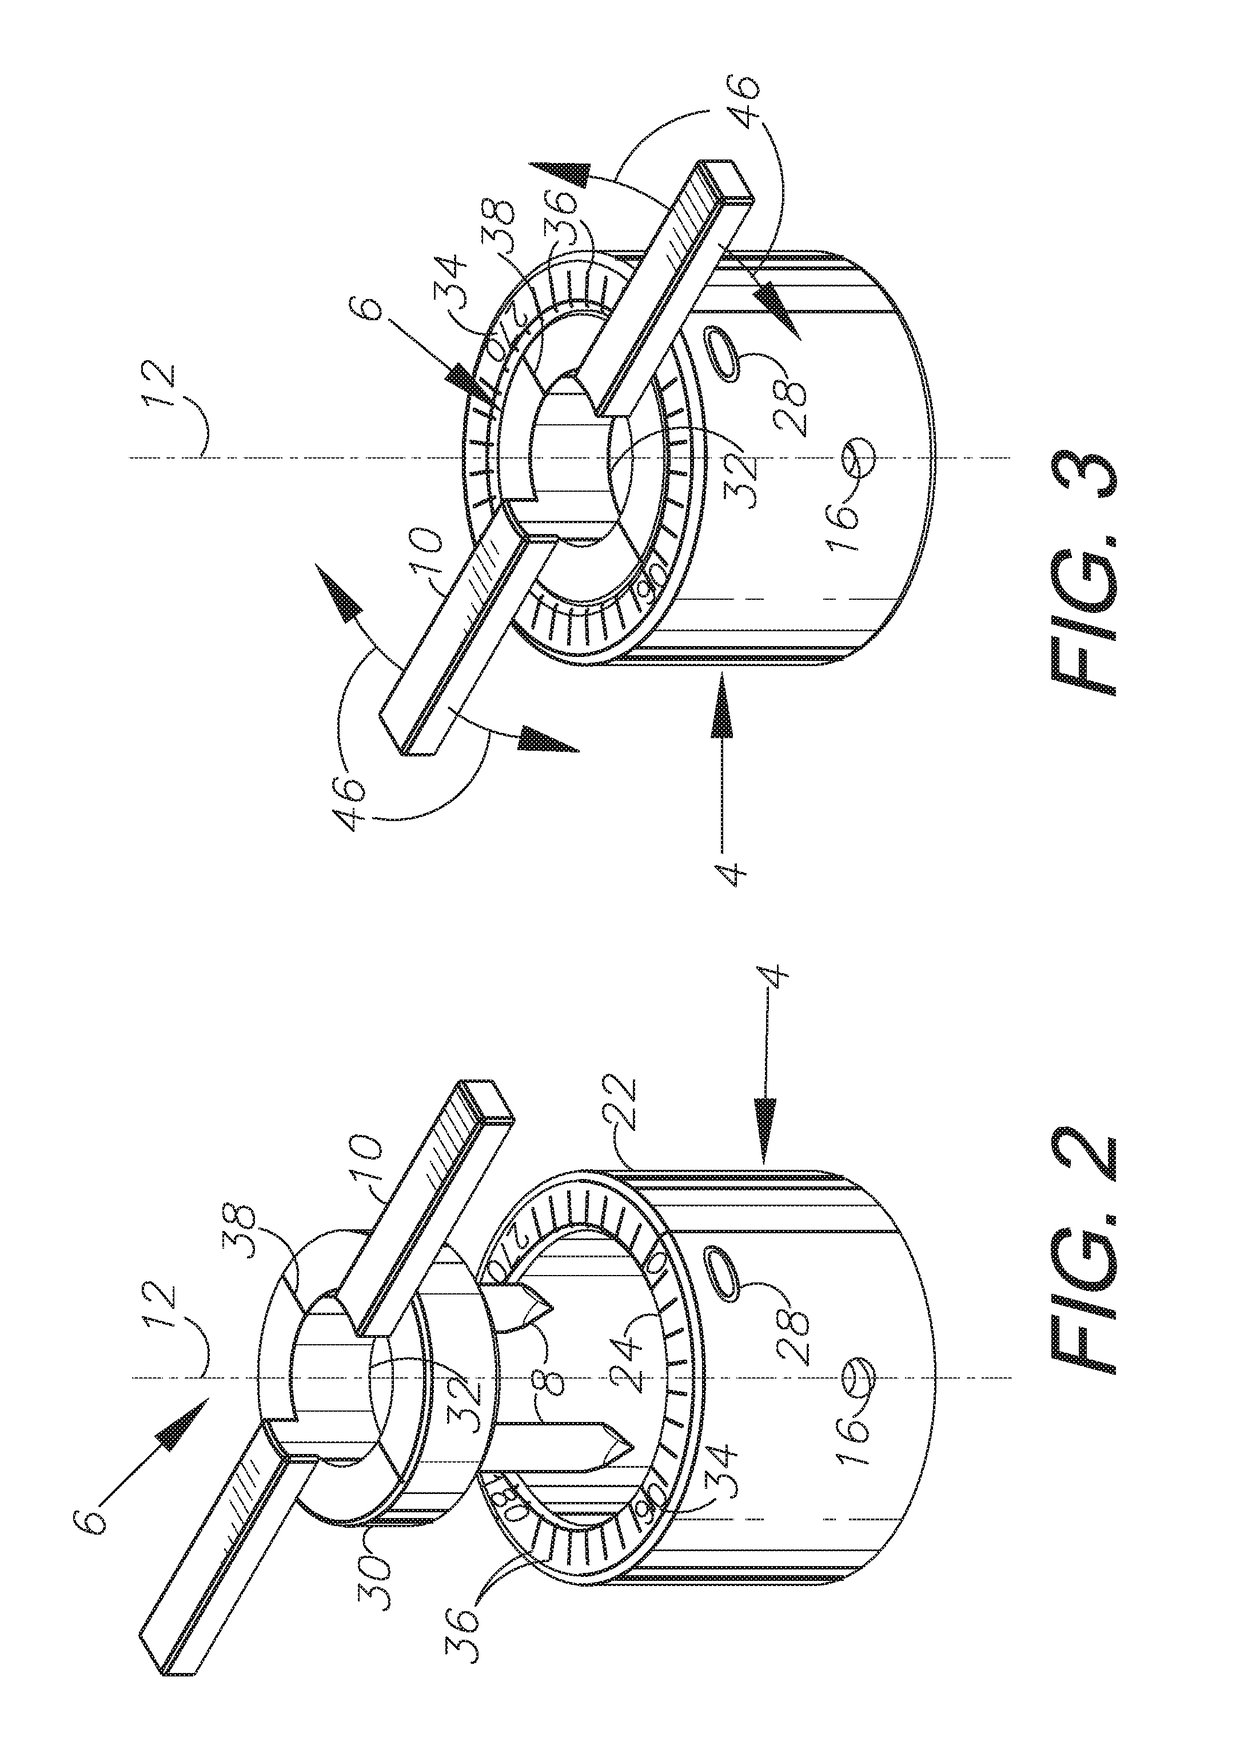 Ophthalmic incisional procedure instrument and method